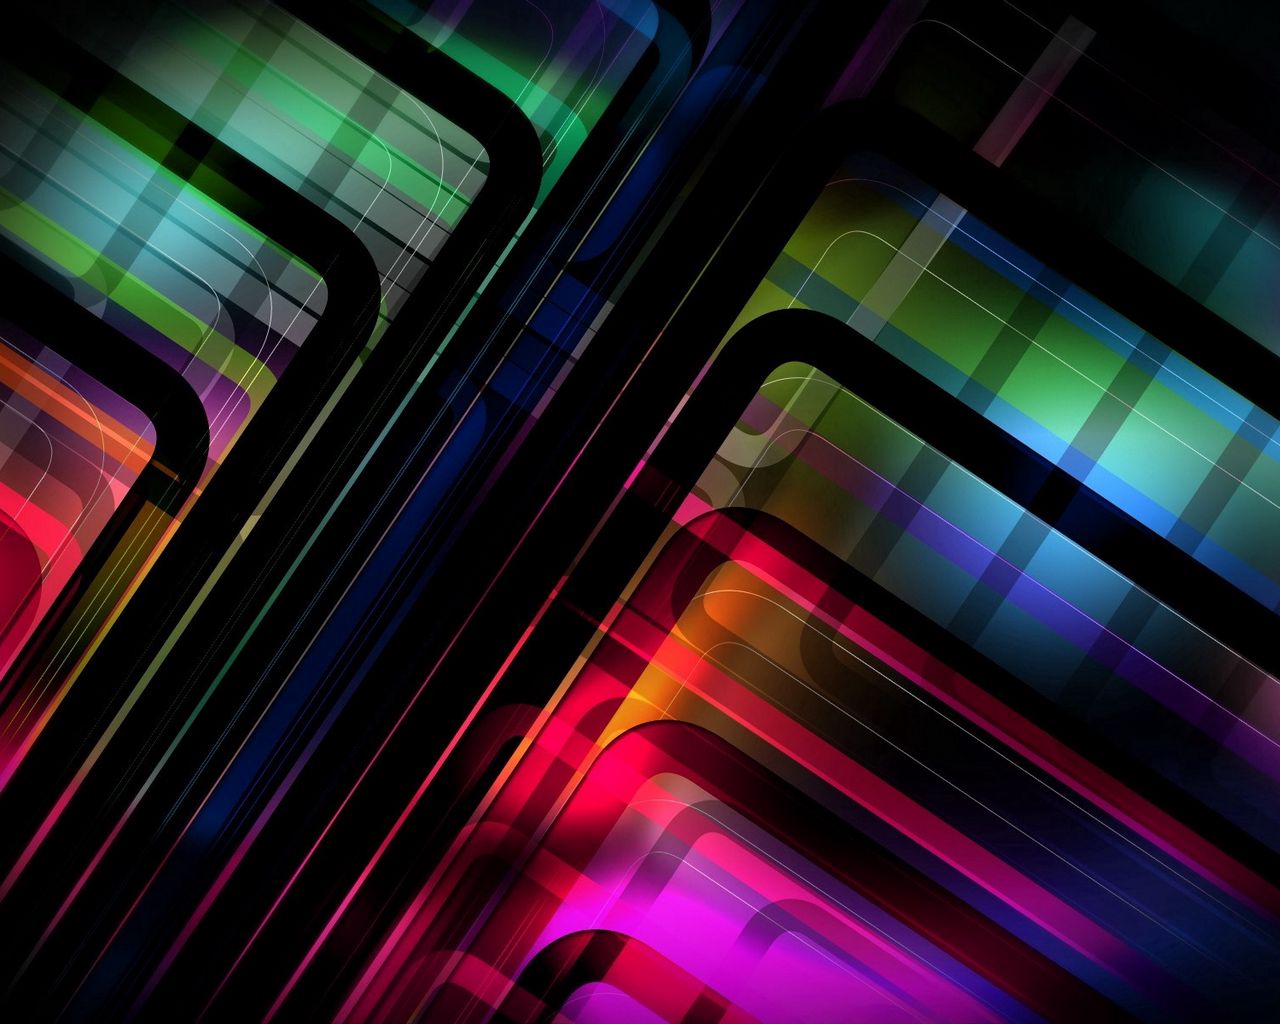 Download wallpaper 1280x1024 abstract, colorful, square, stage standard 5:4  hd background